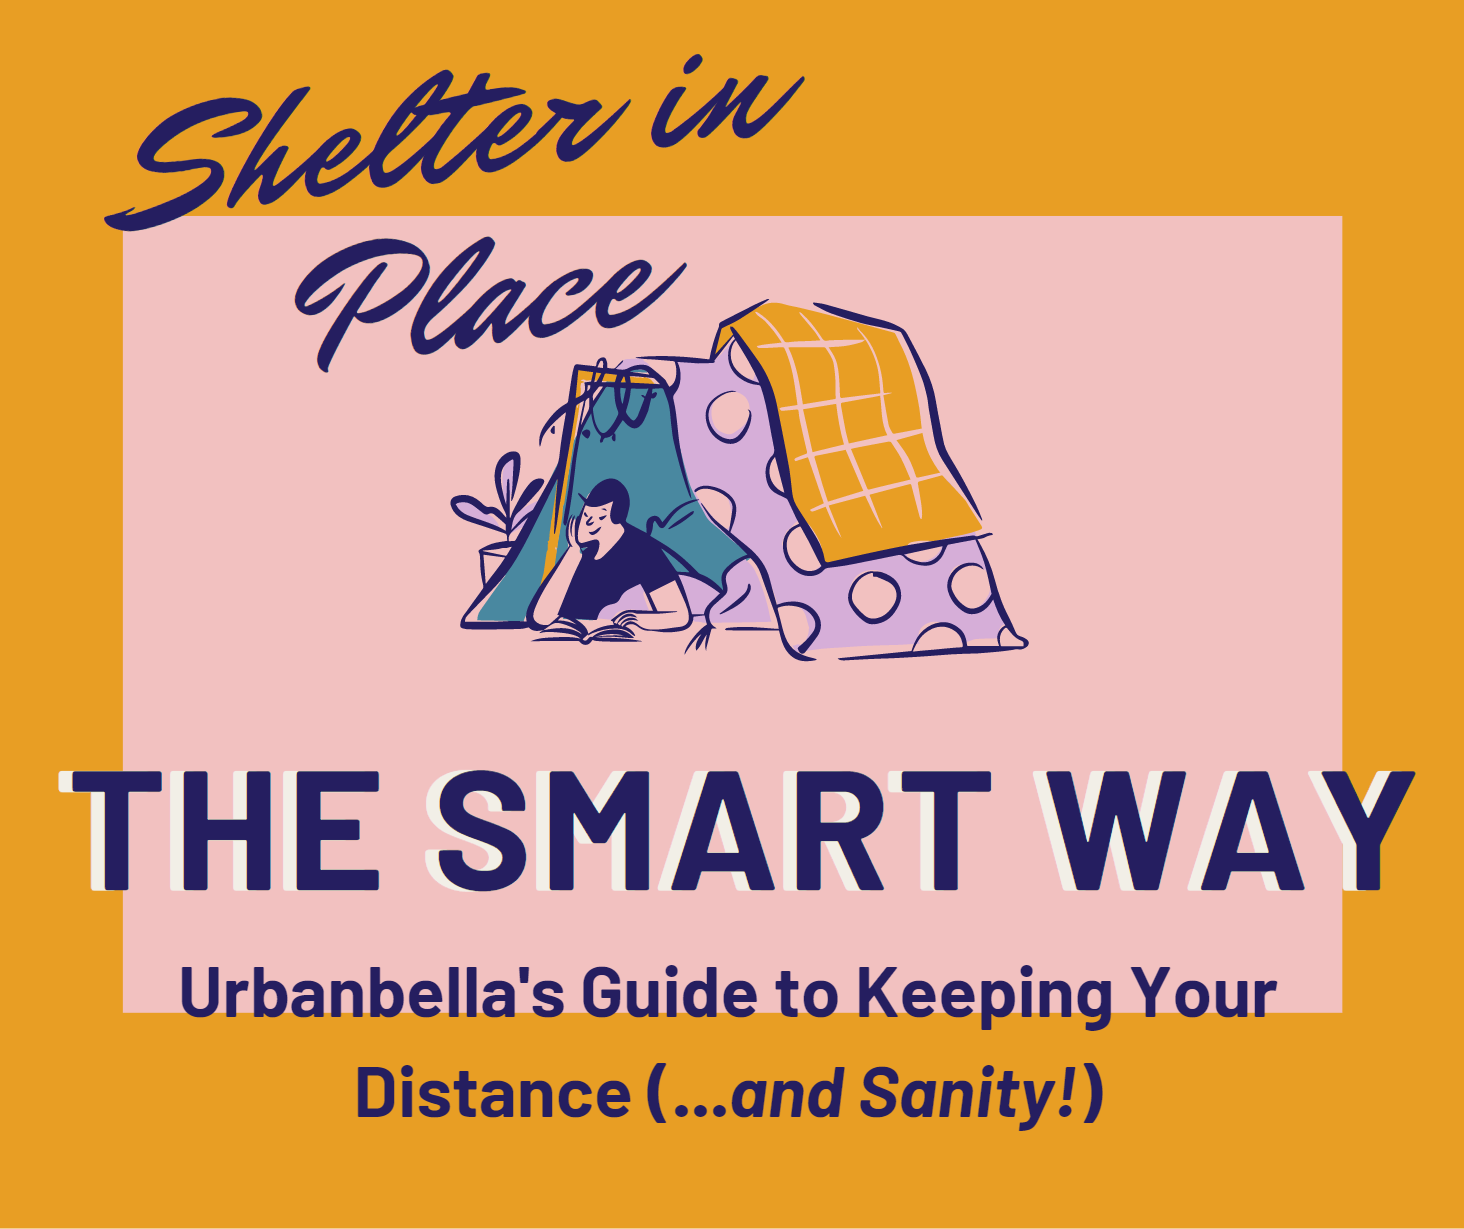 Sheltering in Place the Smart Way